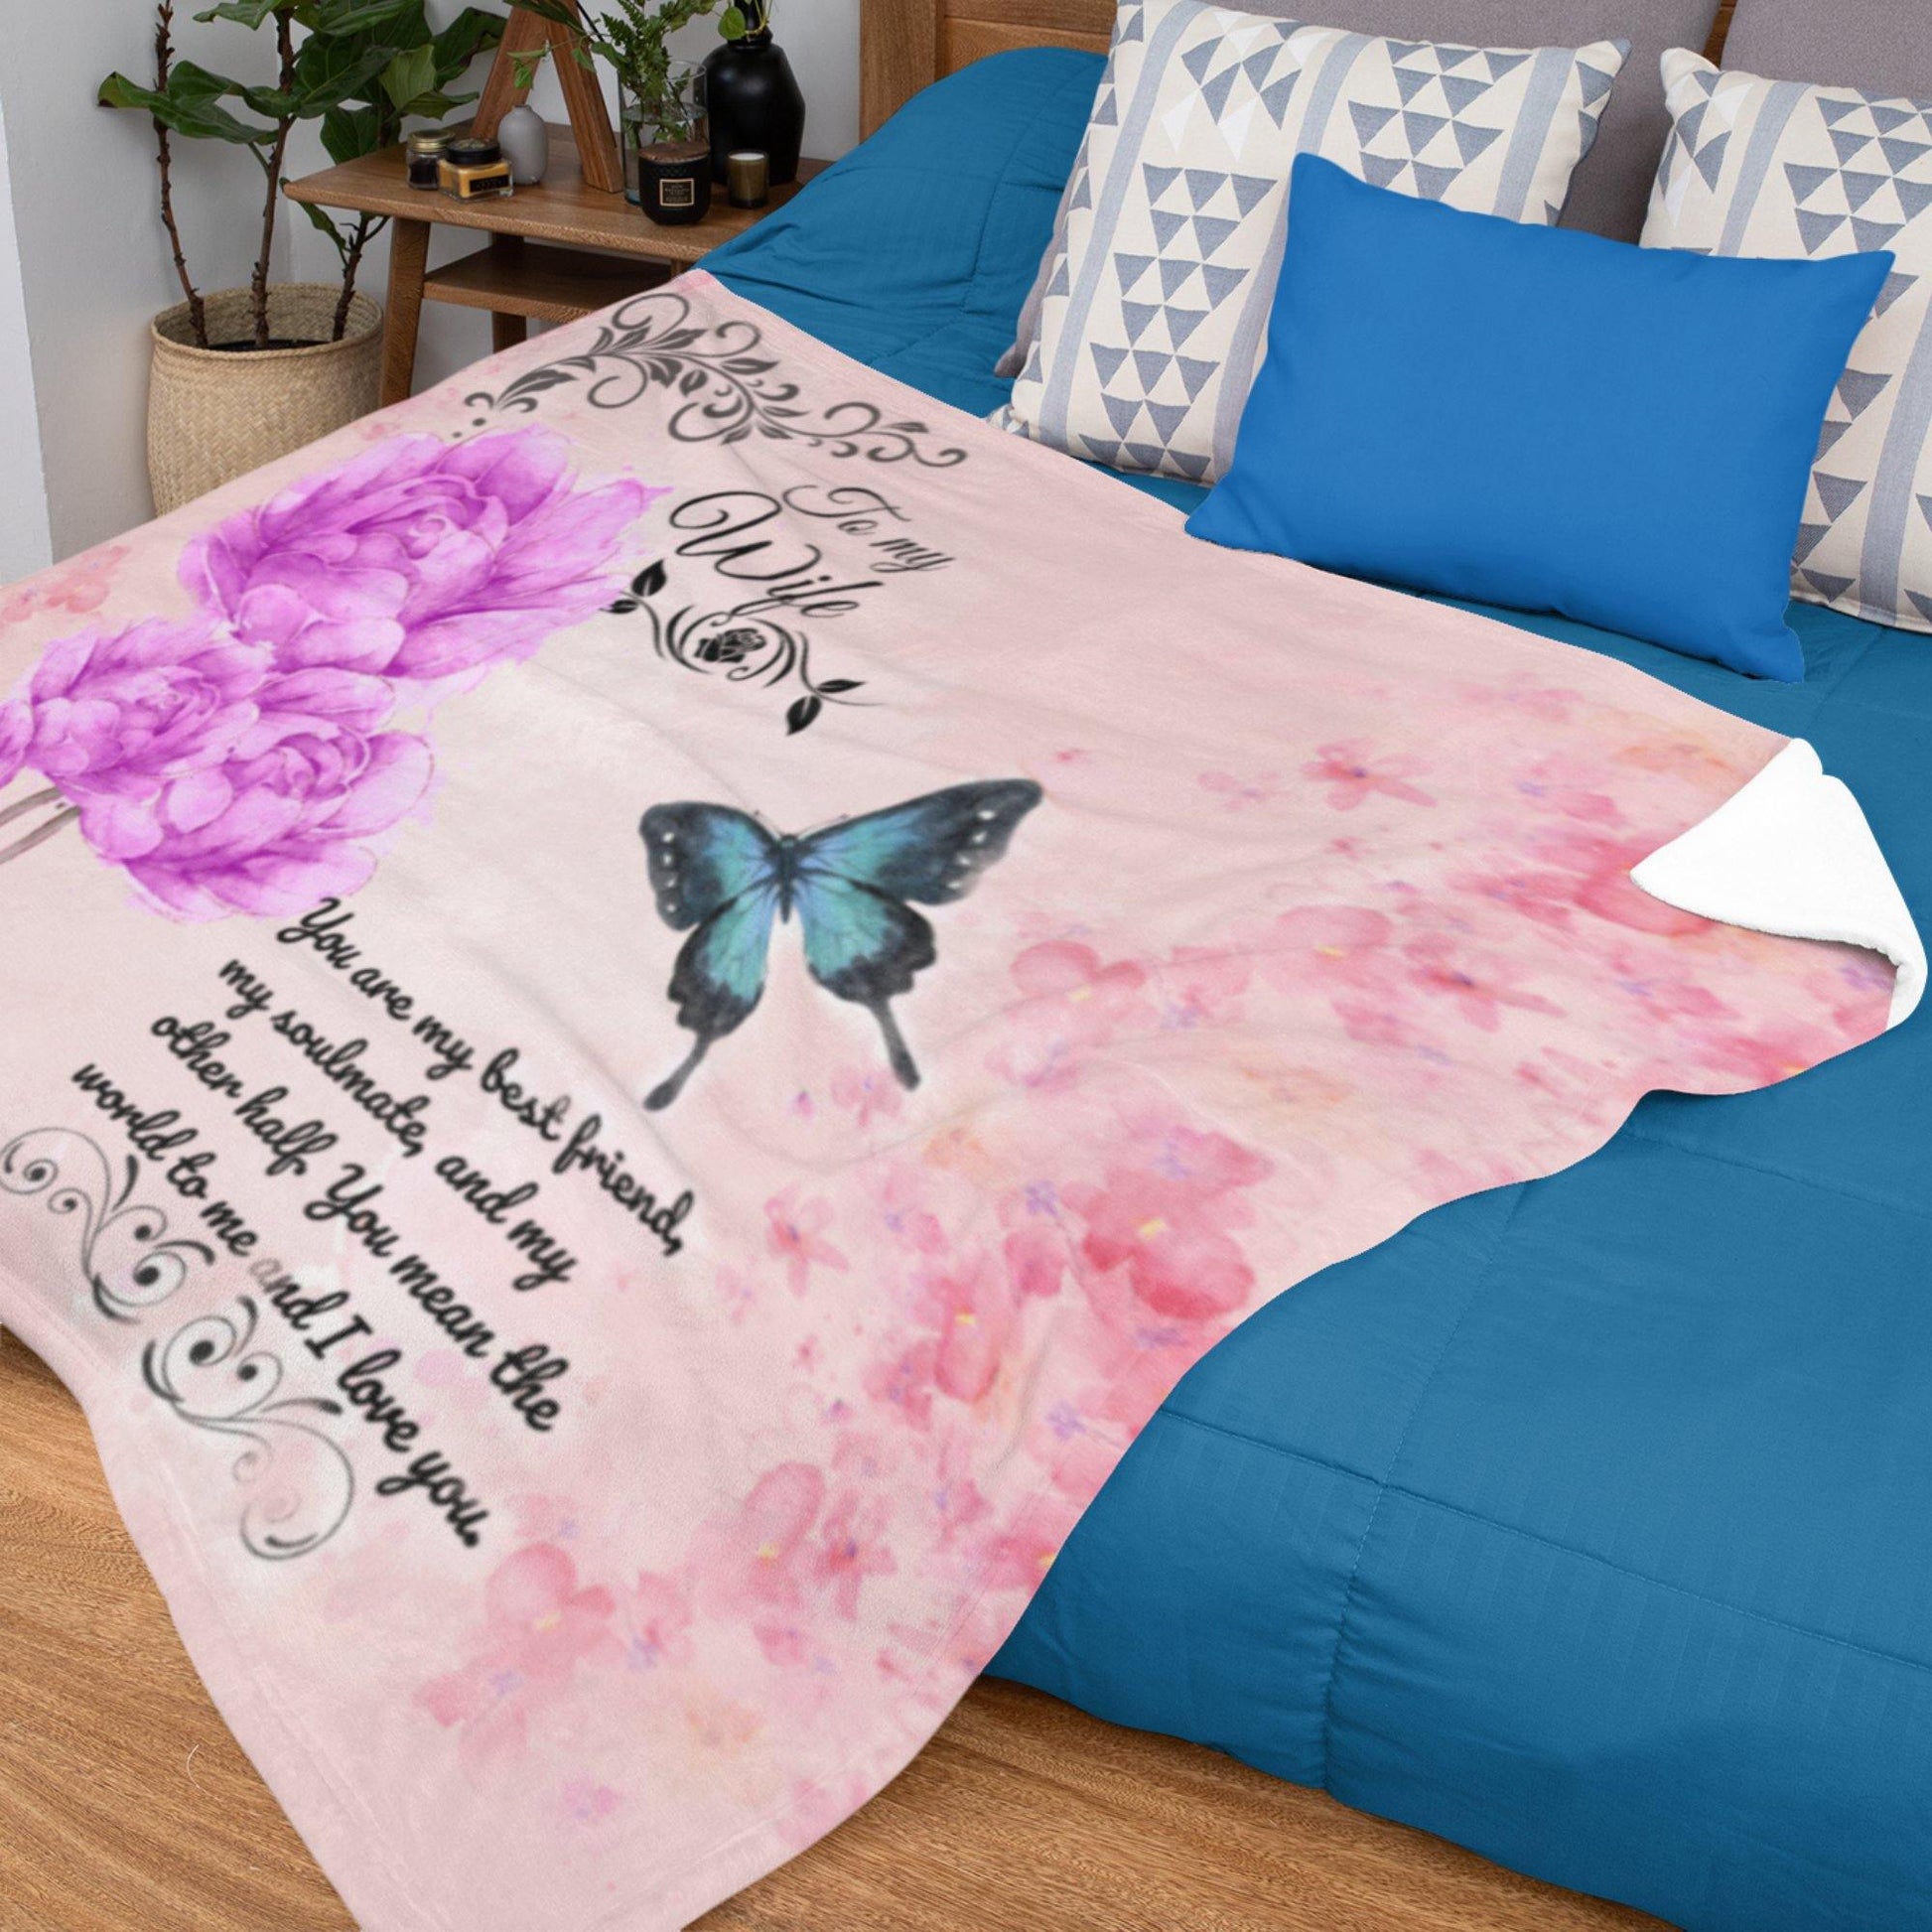 To My Wife Fleece Blanket, You Are My Best Friend, Thoughtful Gift From Husband - Giftagic